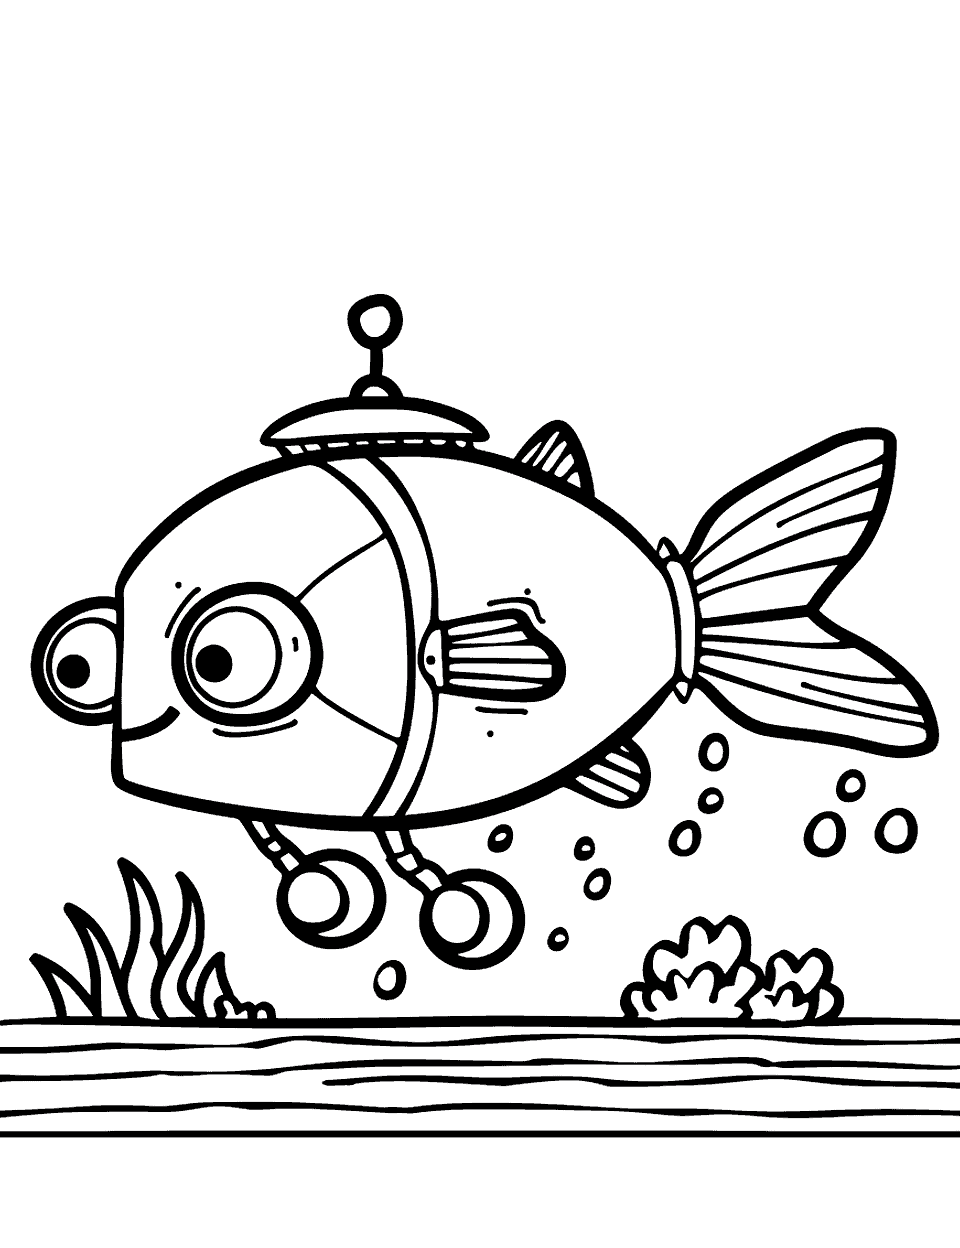 Oceans Robot Coloring Page - A simple robot fish exploring calm water.